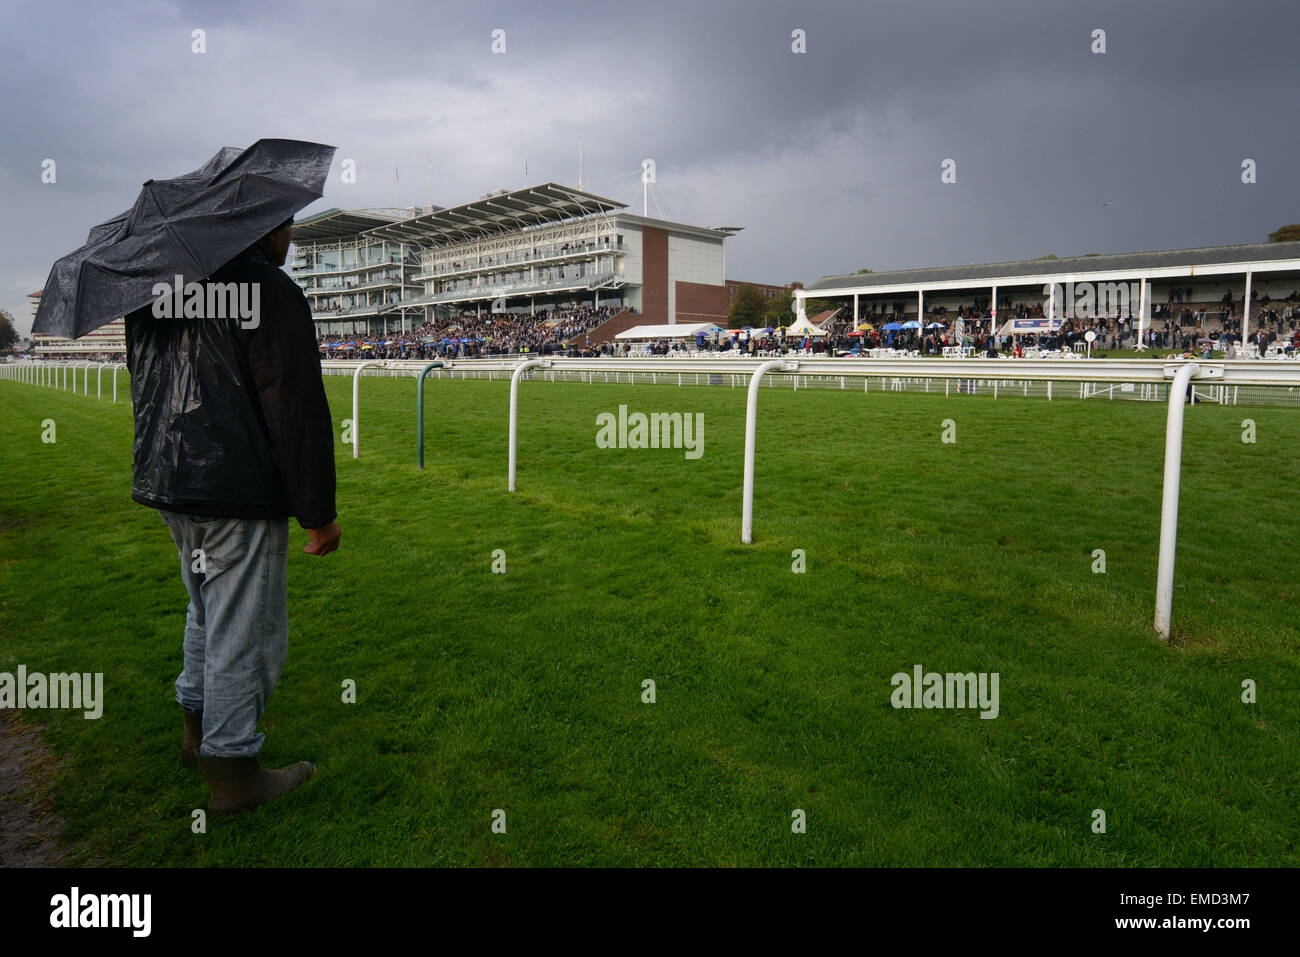 A spectator watching the racing at York Racecourse, North Yorkshire, UK. Picture: Scott Bairstow/Alamy Stock Photo